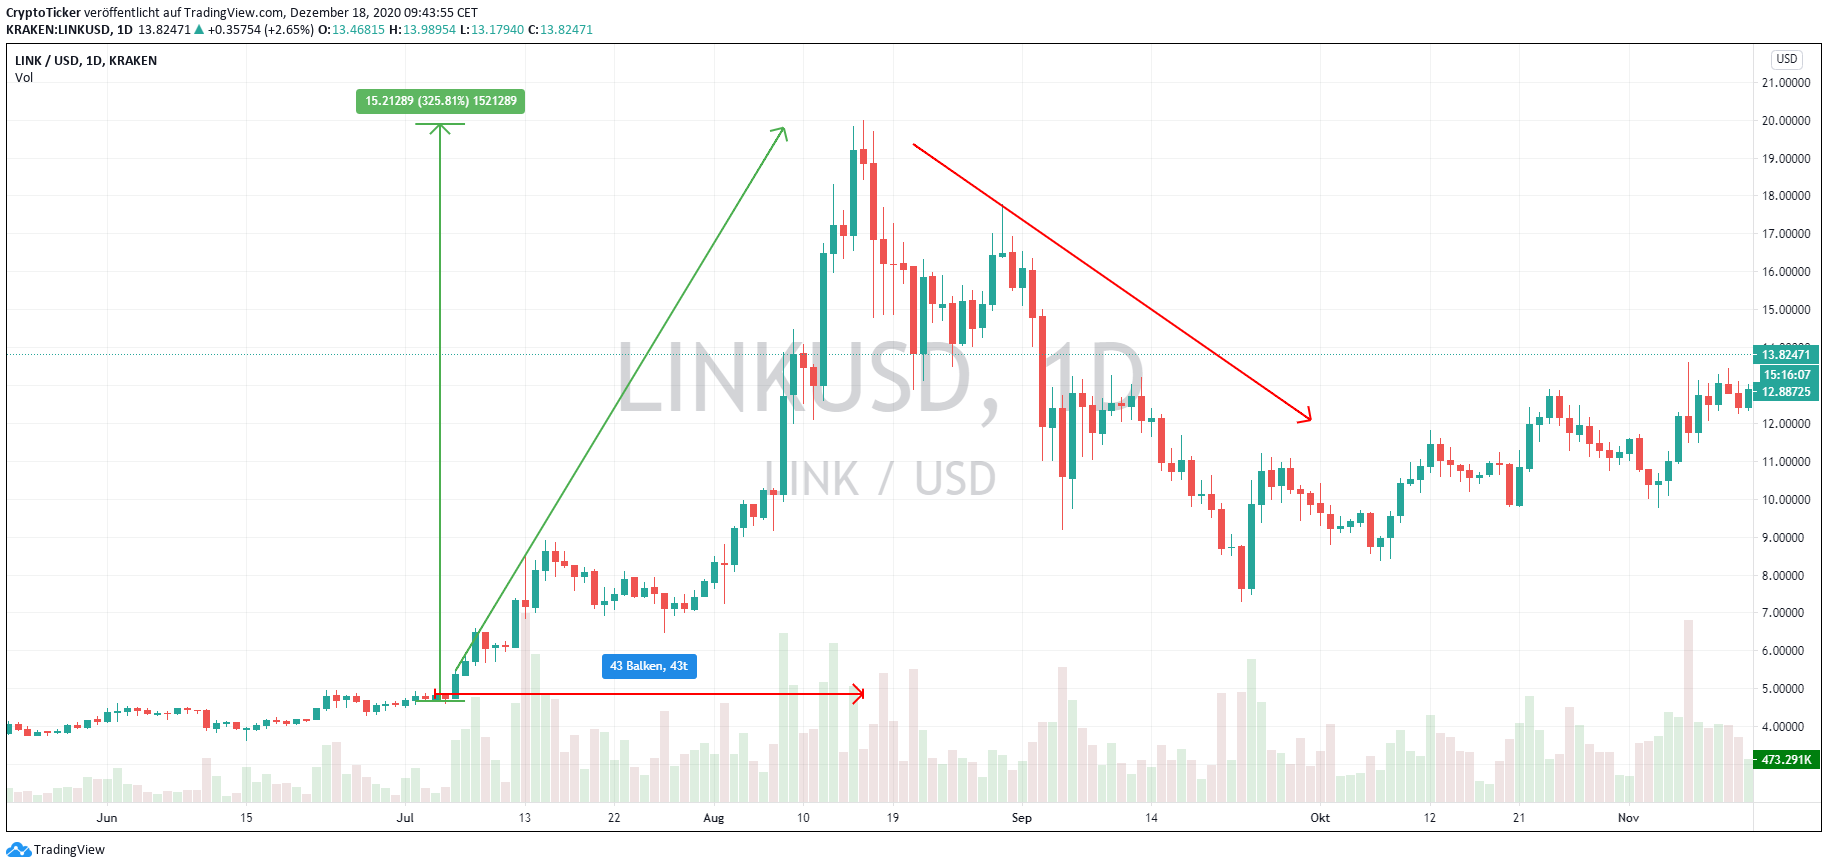 LINK/USD 1-Day chart – The rise and fall of Summer 2020